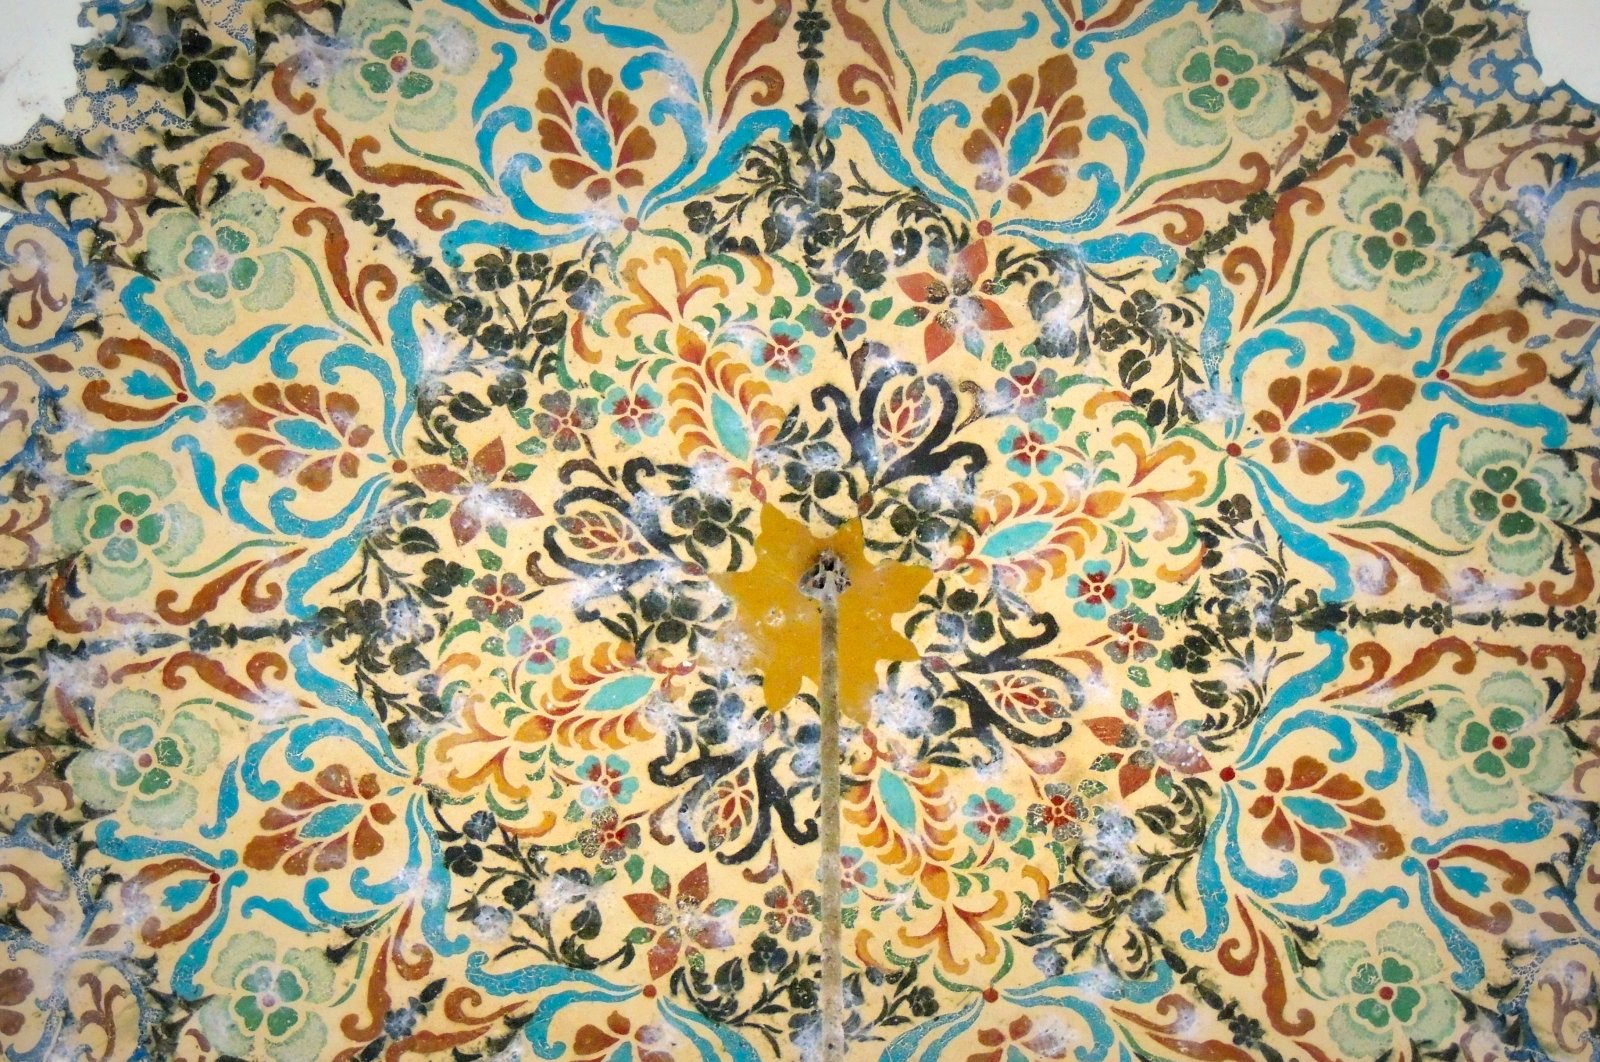 A close-up view of the details of a colorful floral pattern on the ceiling of the tomb of Attar of Nishapur, a renowned Iranian poet from the medieval era and theoretician of Sufism, Nishapur, Iran, Aug. 19, 2014. (Getty Images Photo)